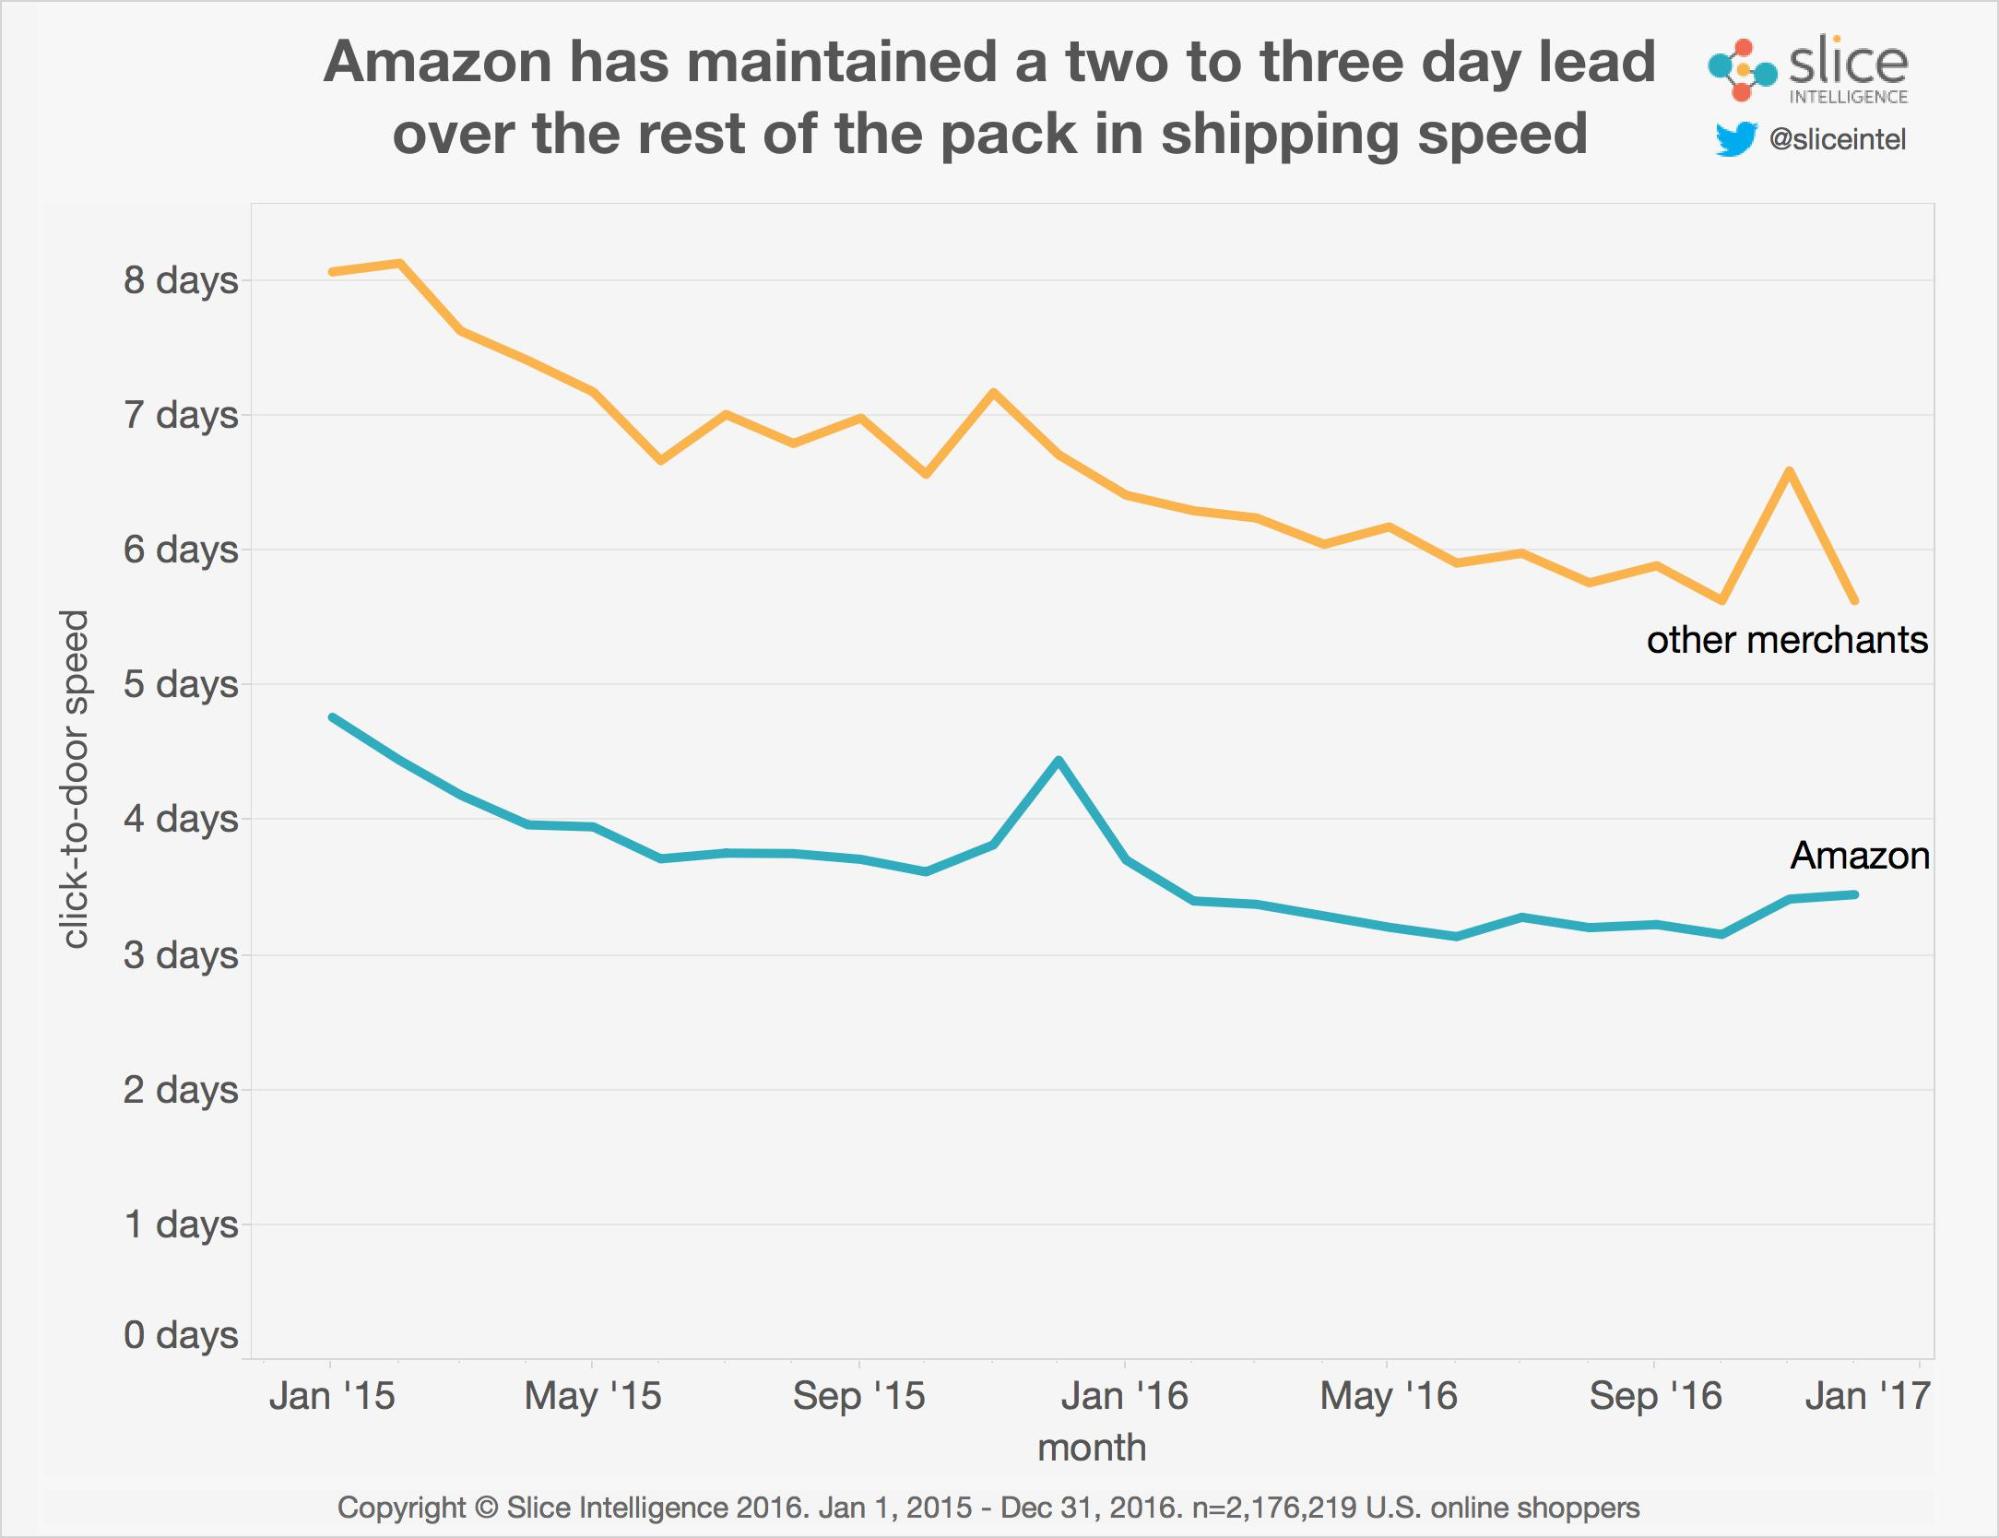 amazon shipping speed leads competitors